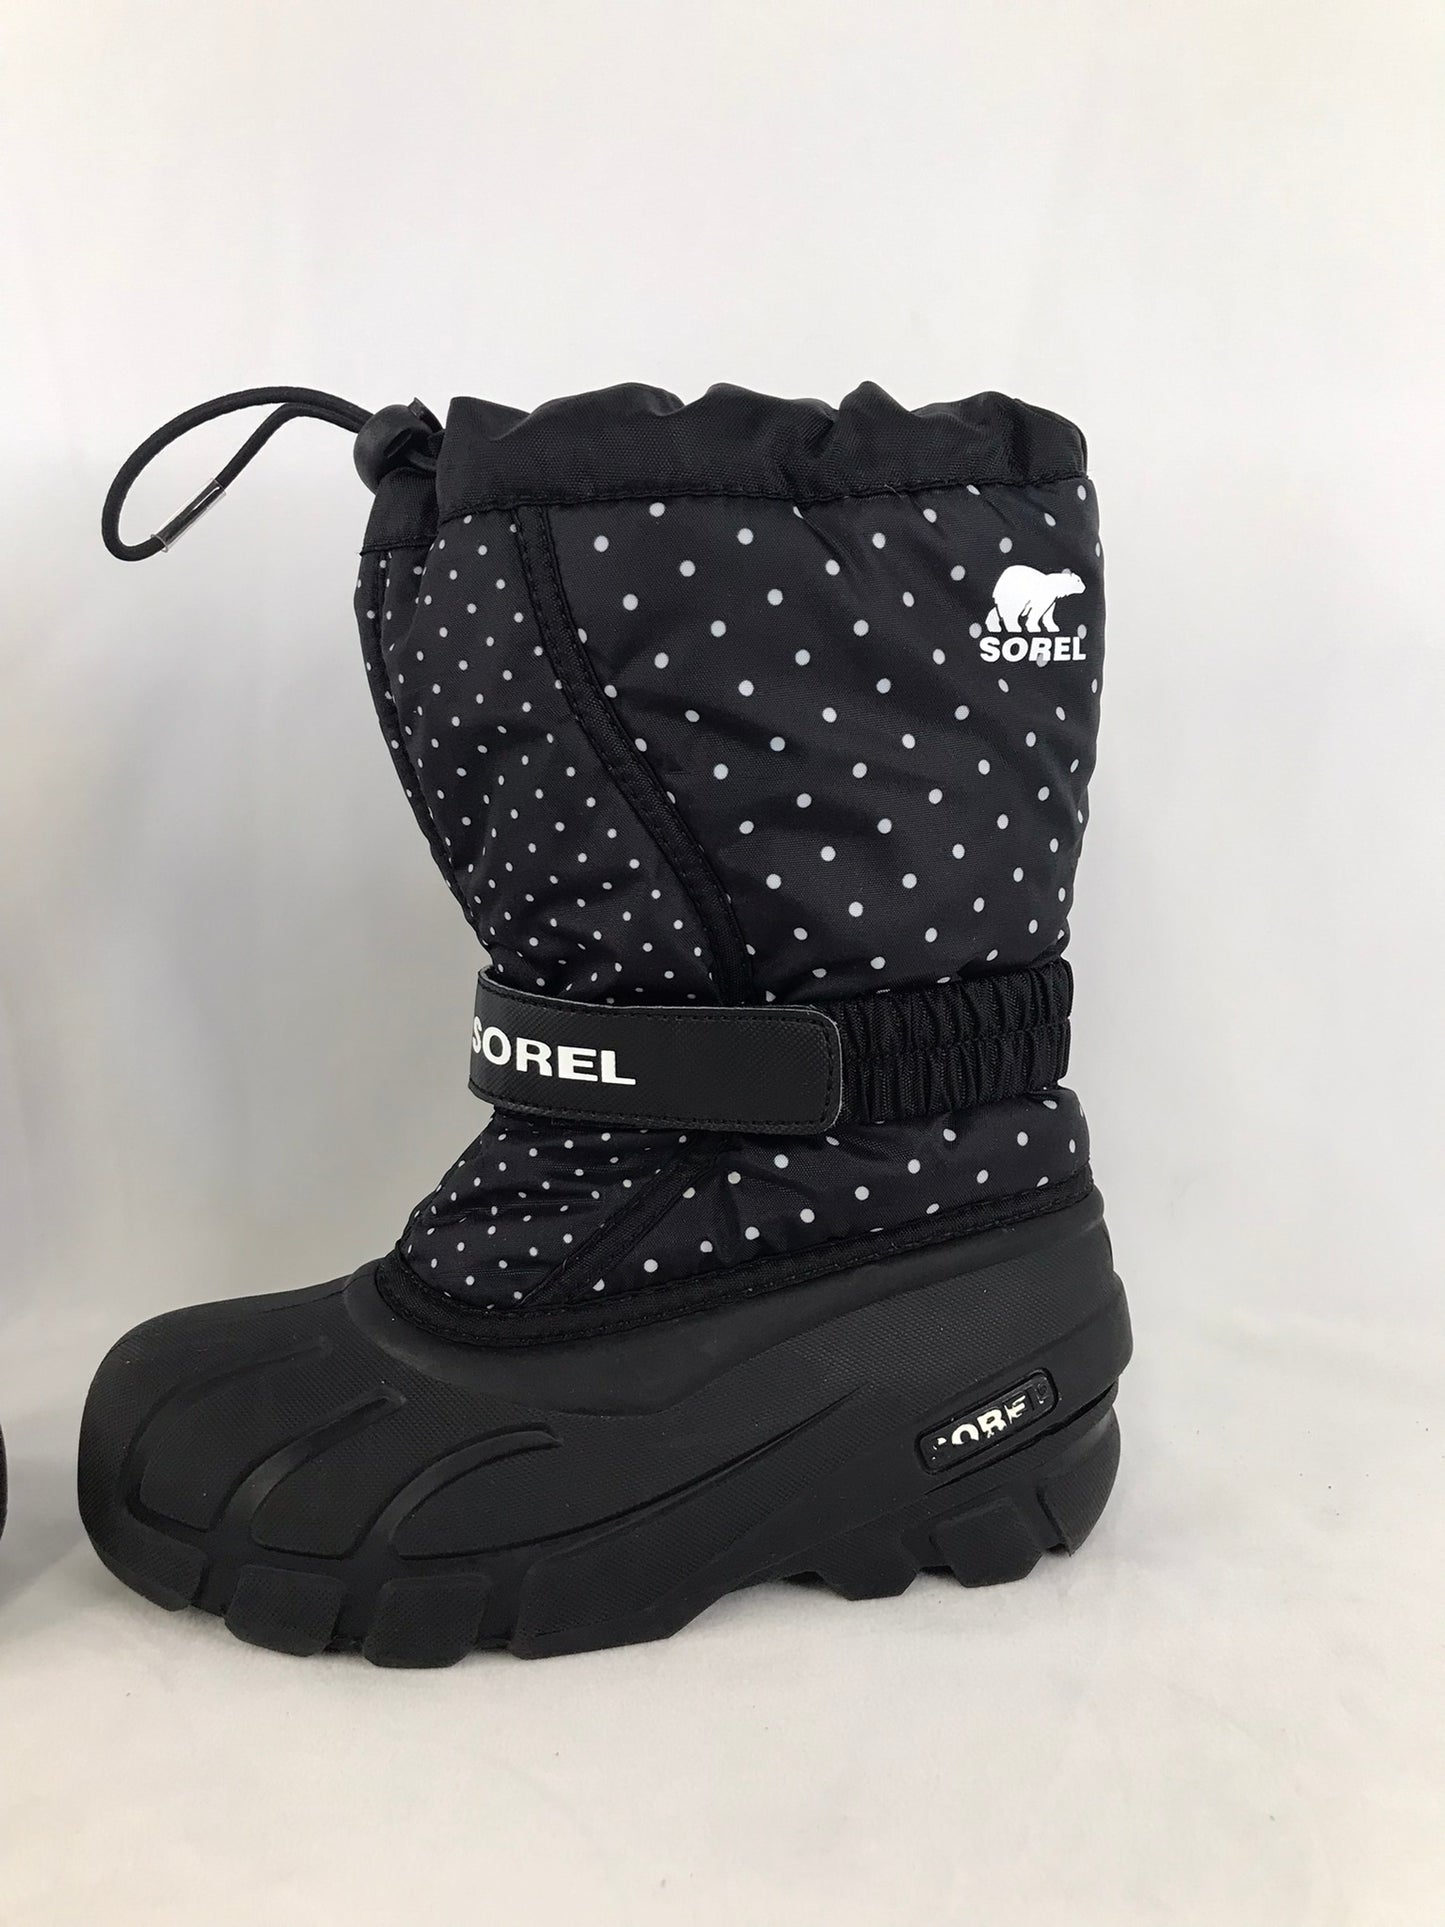 Winter Boots Child Size 1 Sorel Black White Dotted With Liner Excellent